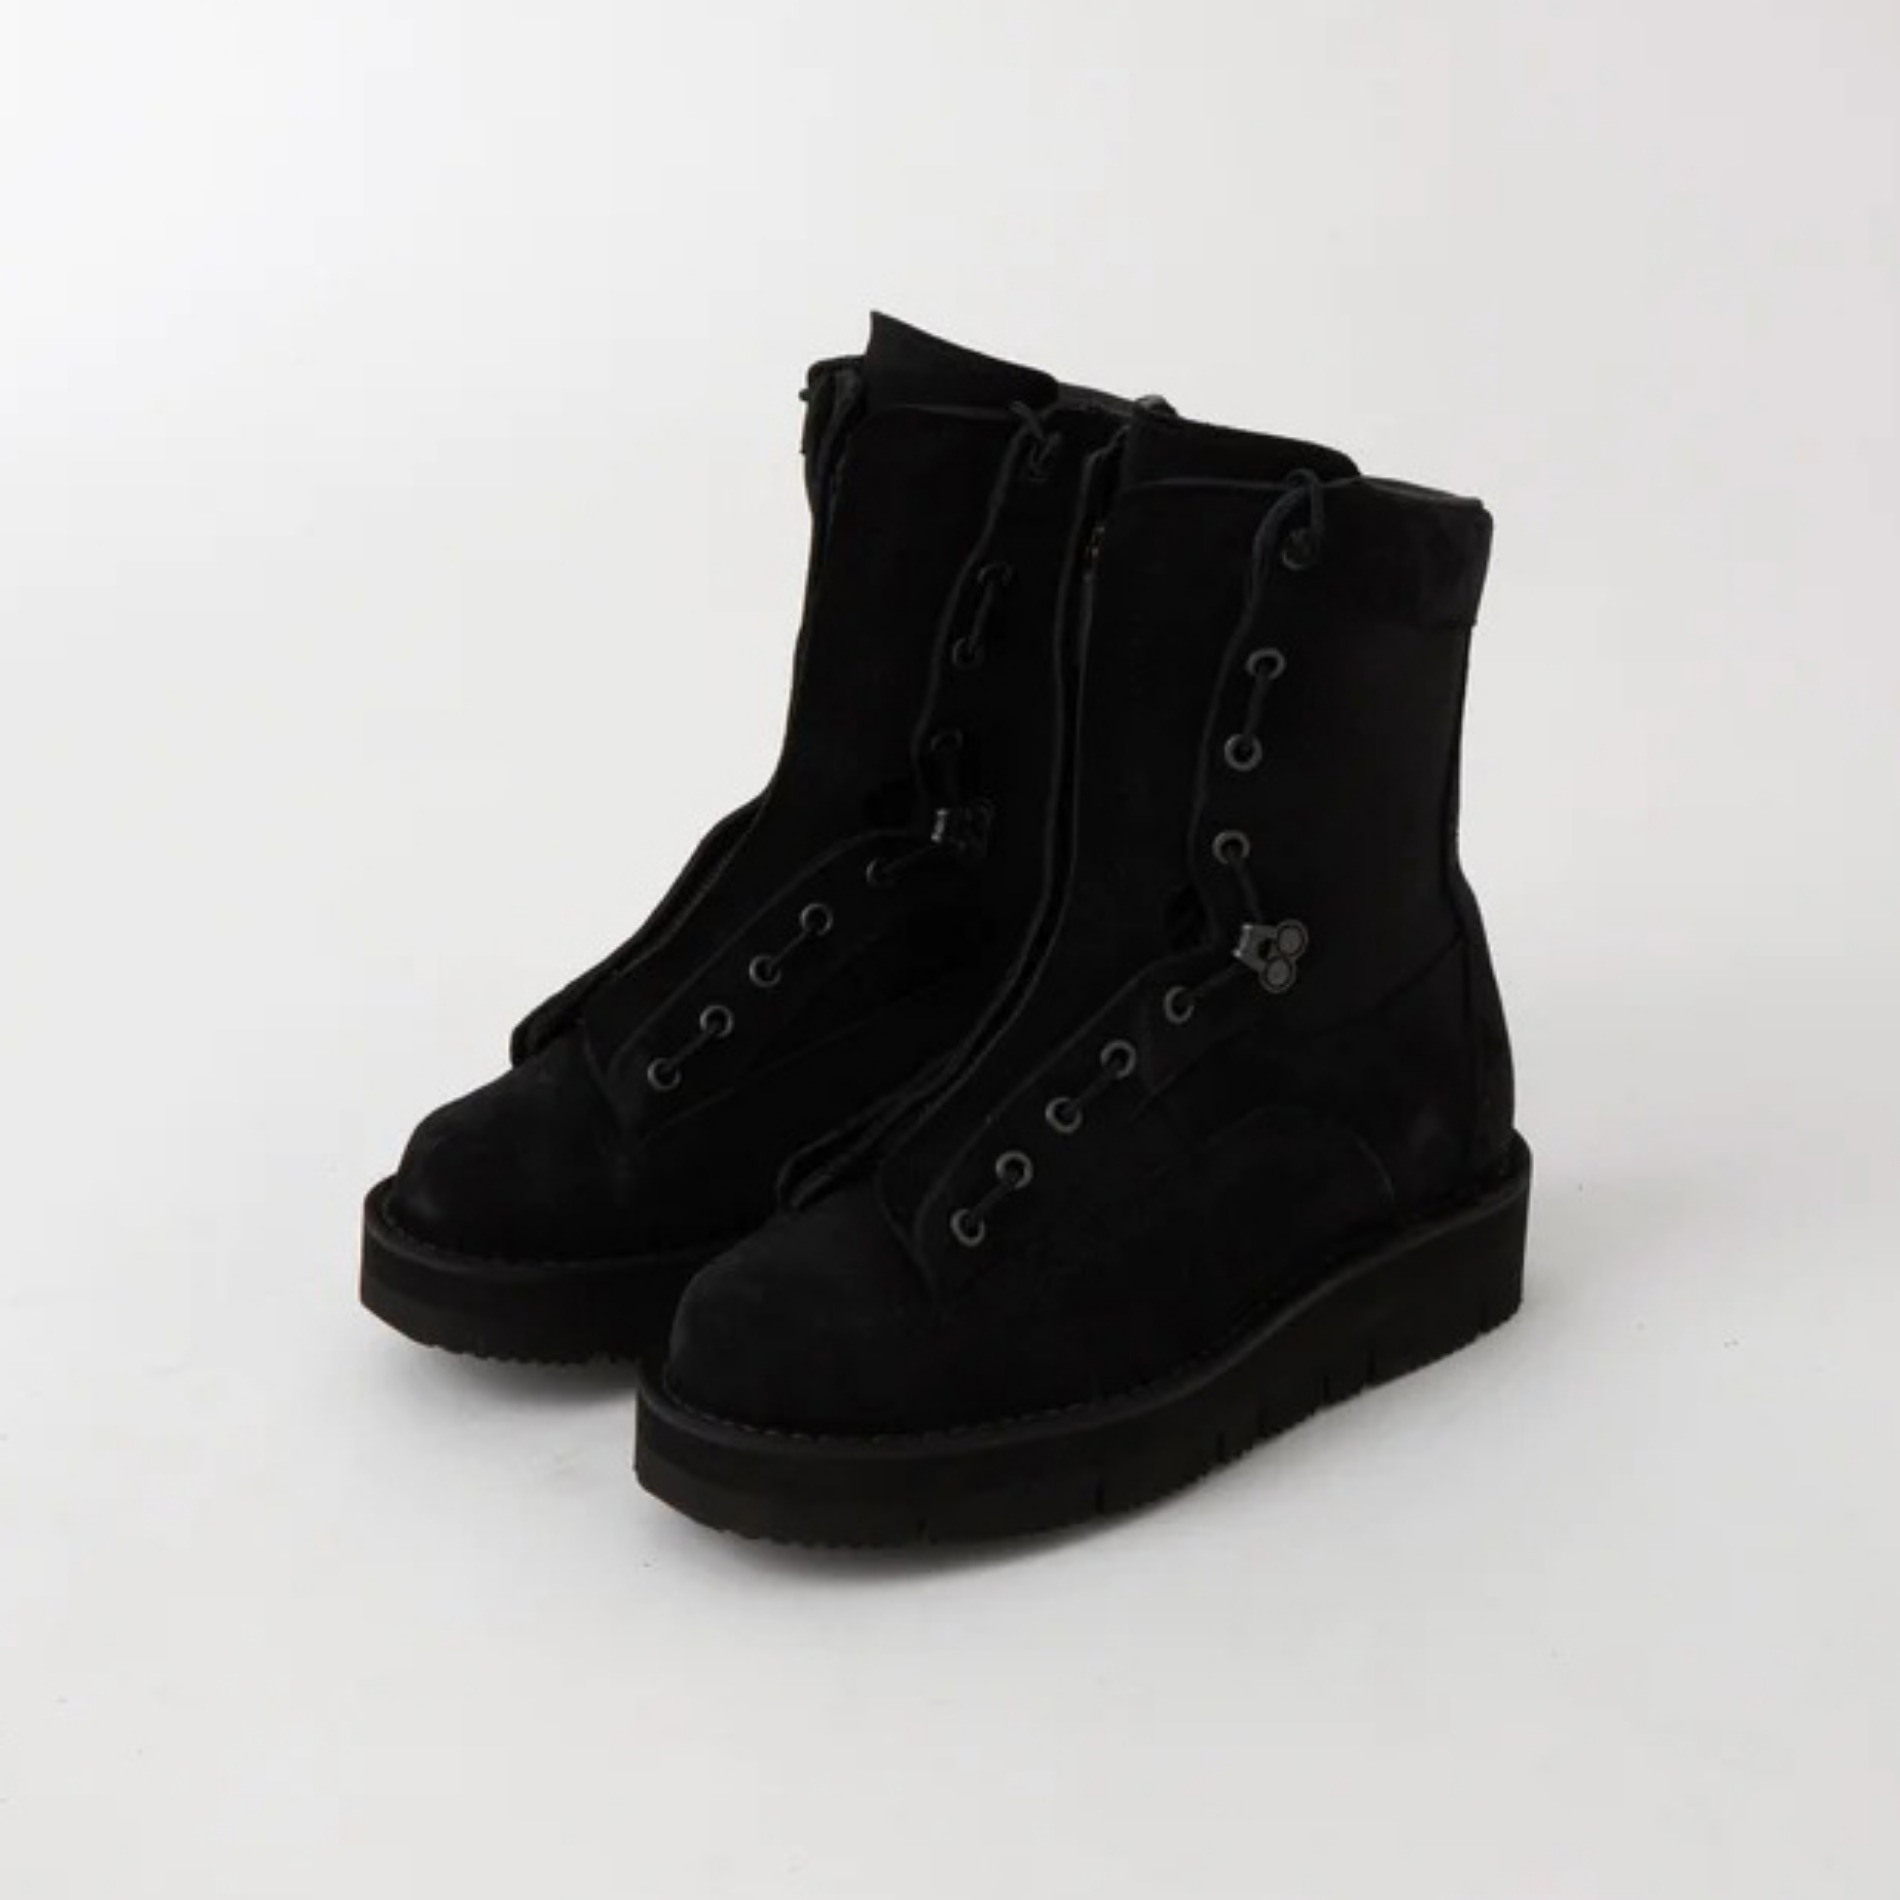 AW22 WHITE MOUNTAINEERING X DANNER COMBAT BOOTS BLACK